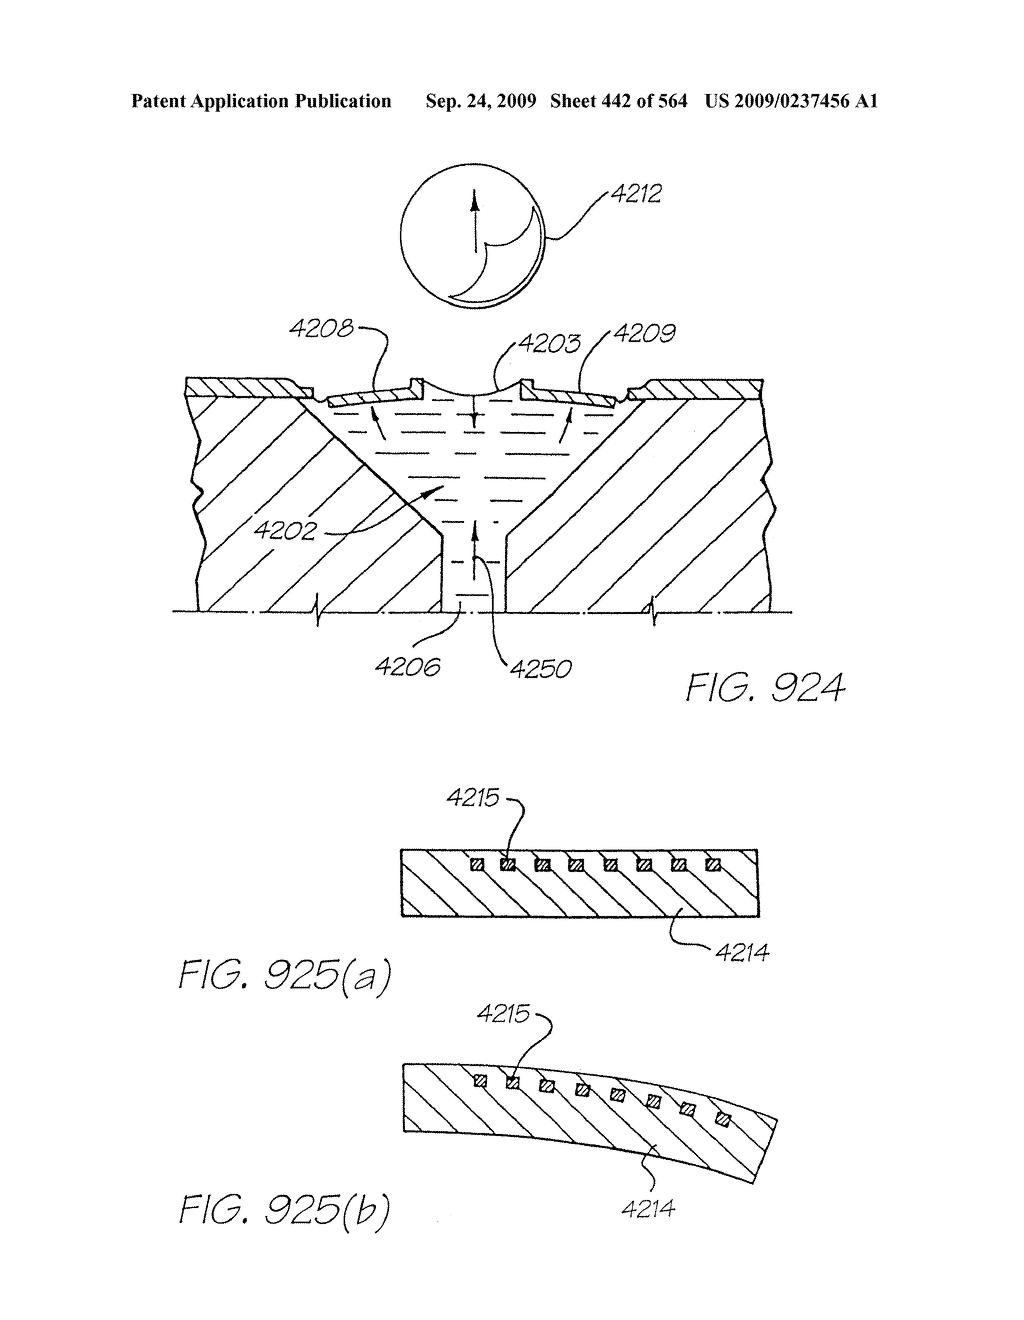 Inkjet Printhead With Paddle For Ejecting Ink From One Of Two Nozzles - diagram, schematic, and image 443